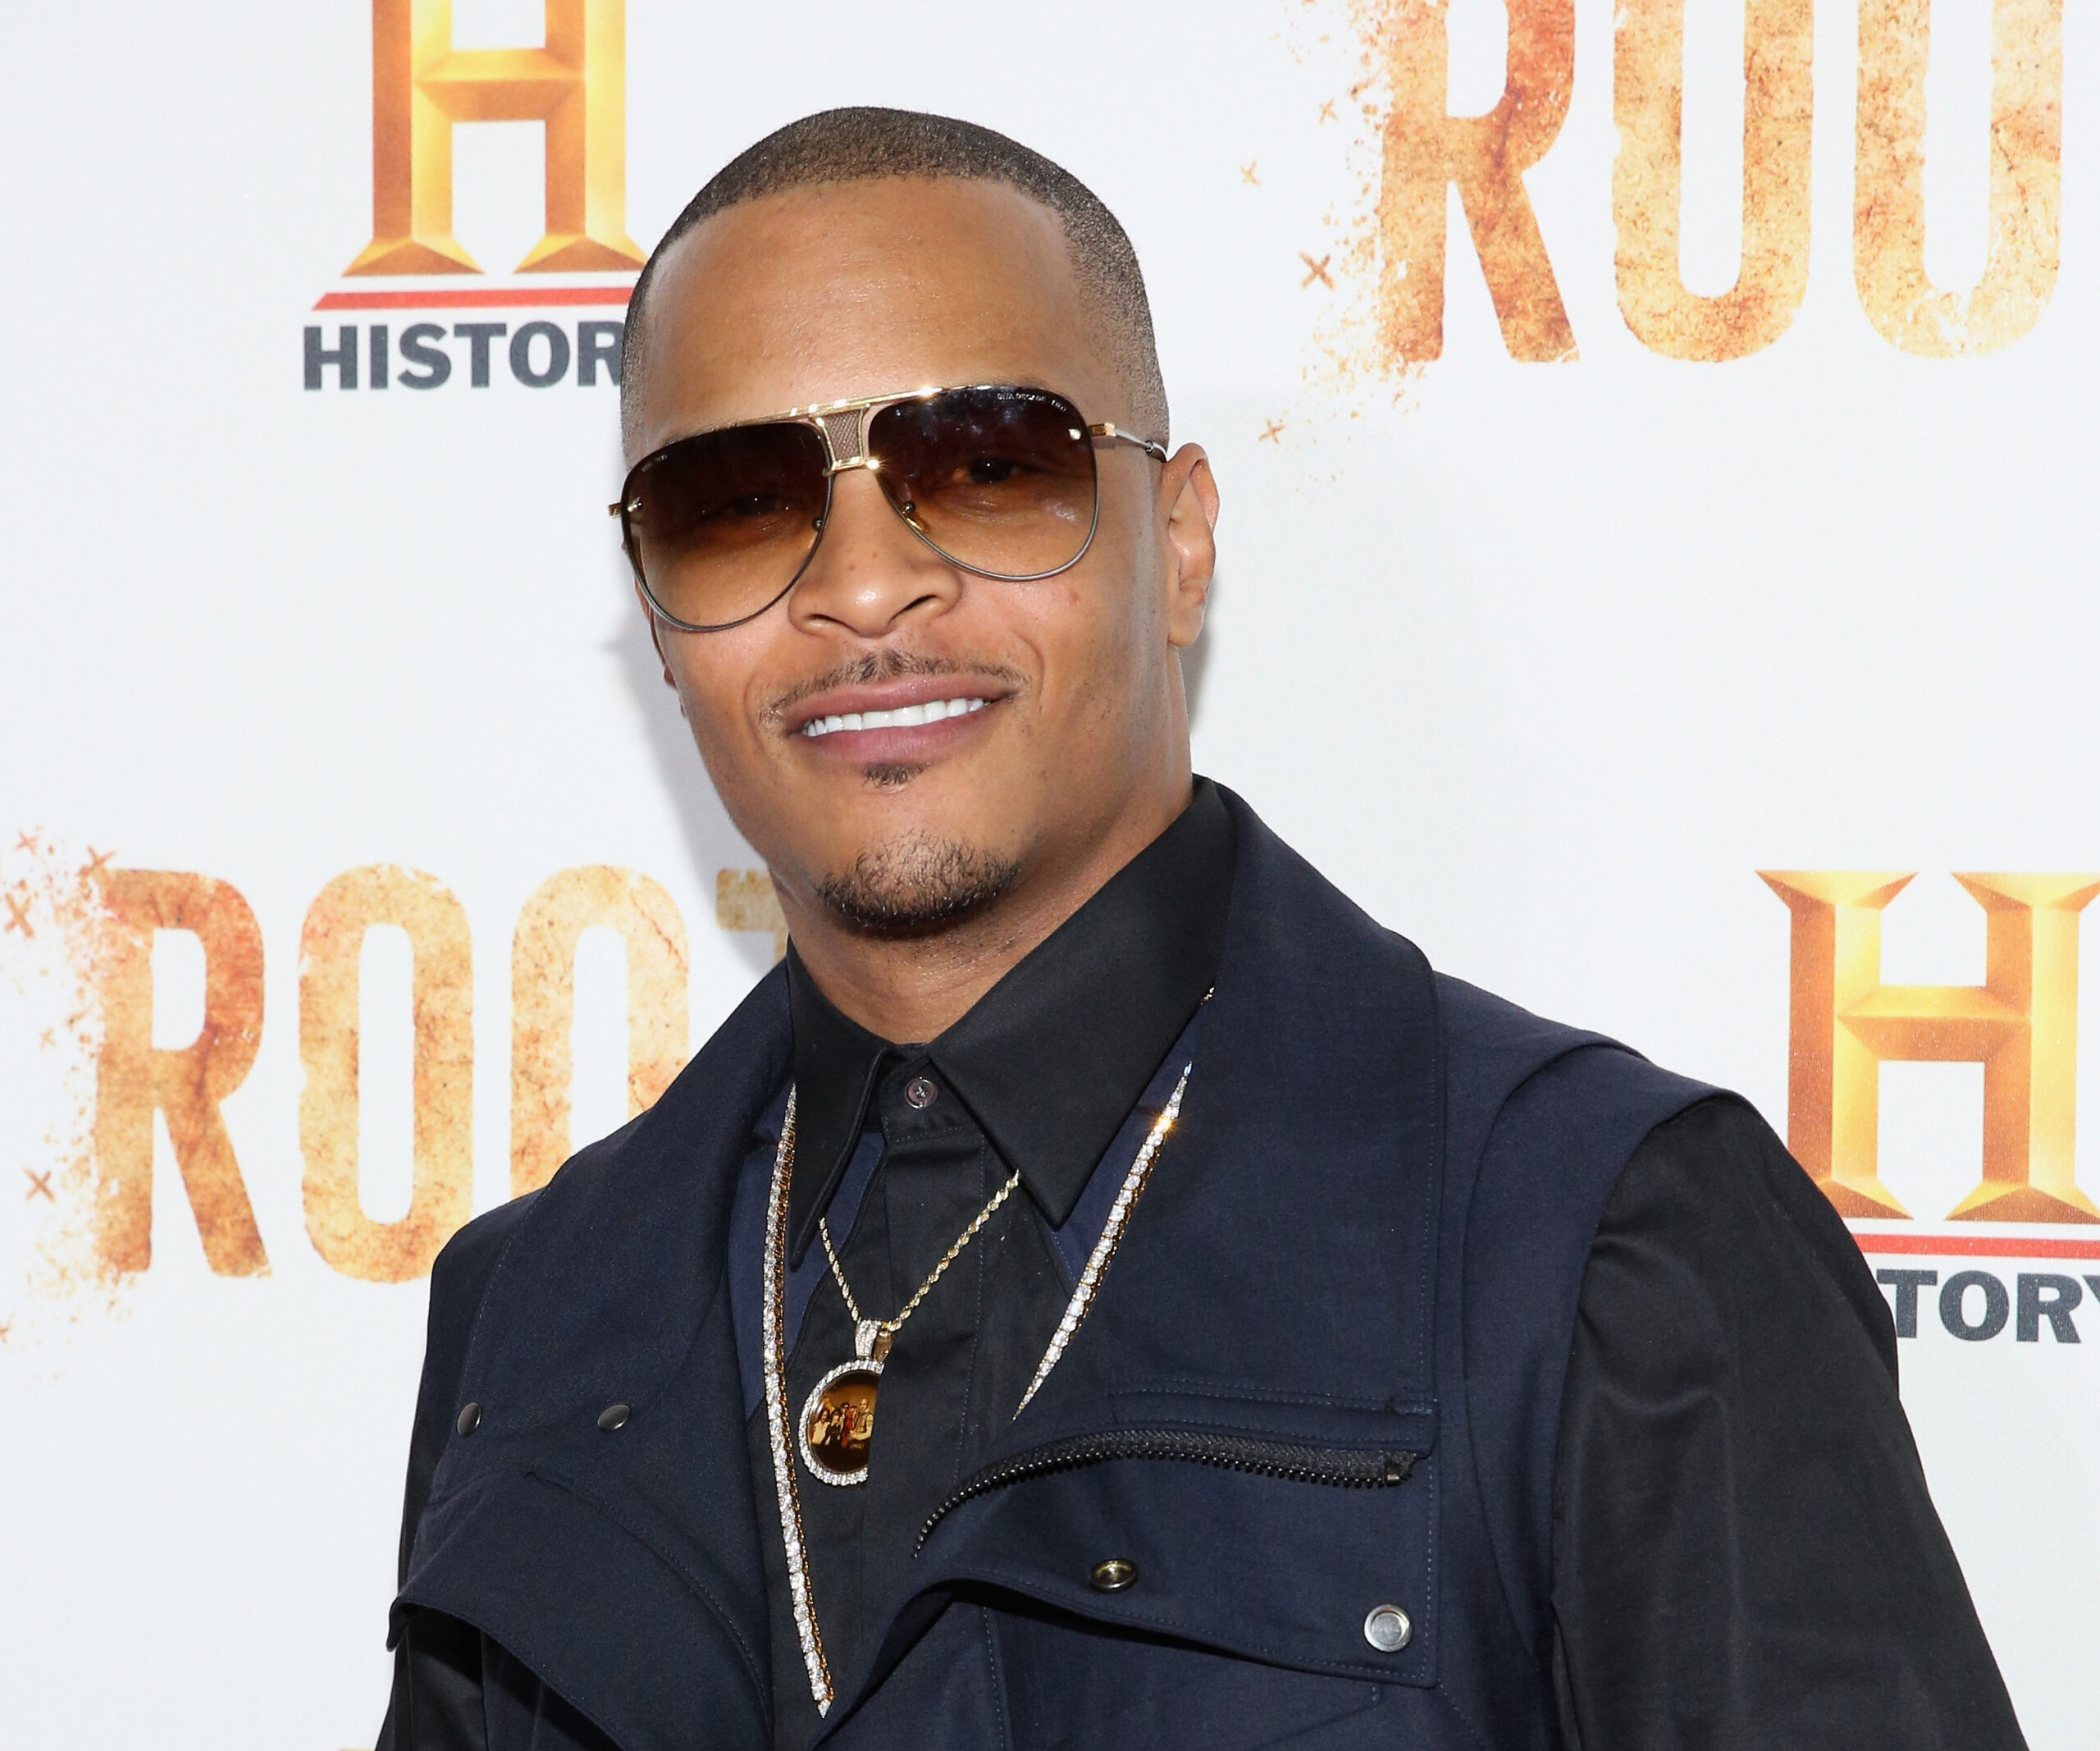 One dead, three wounded in shooting at rapper T.I. concert